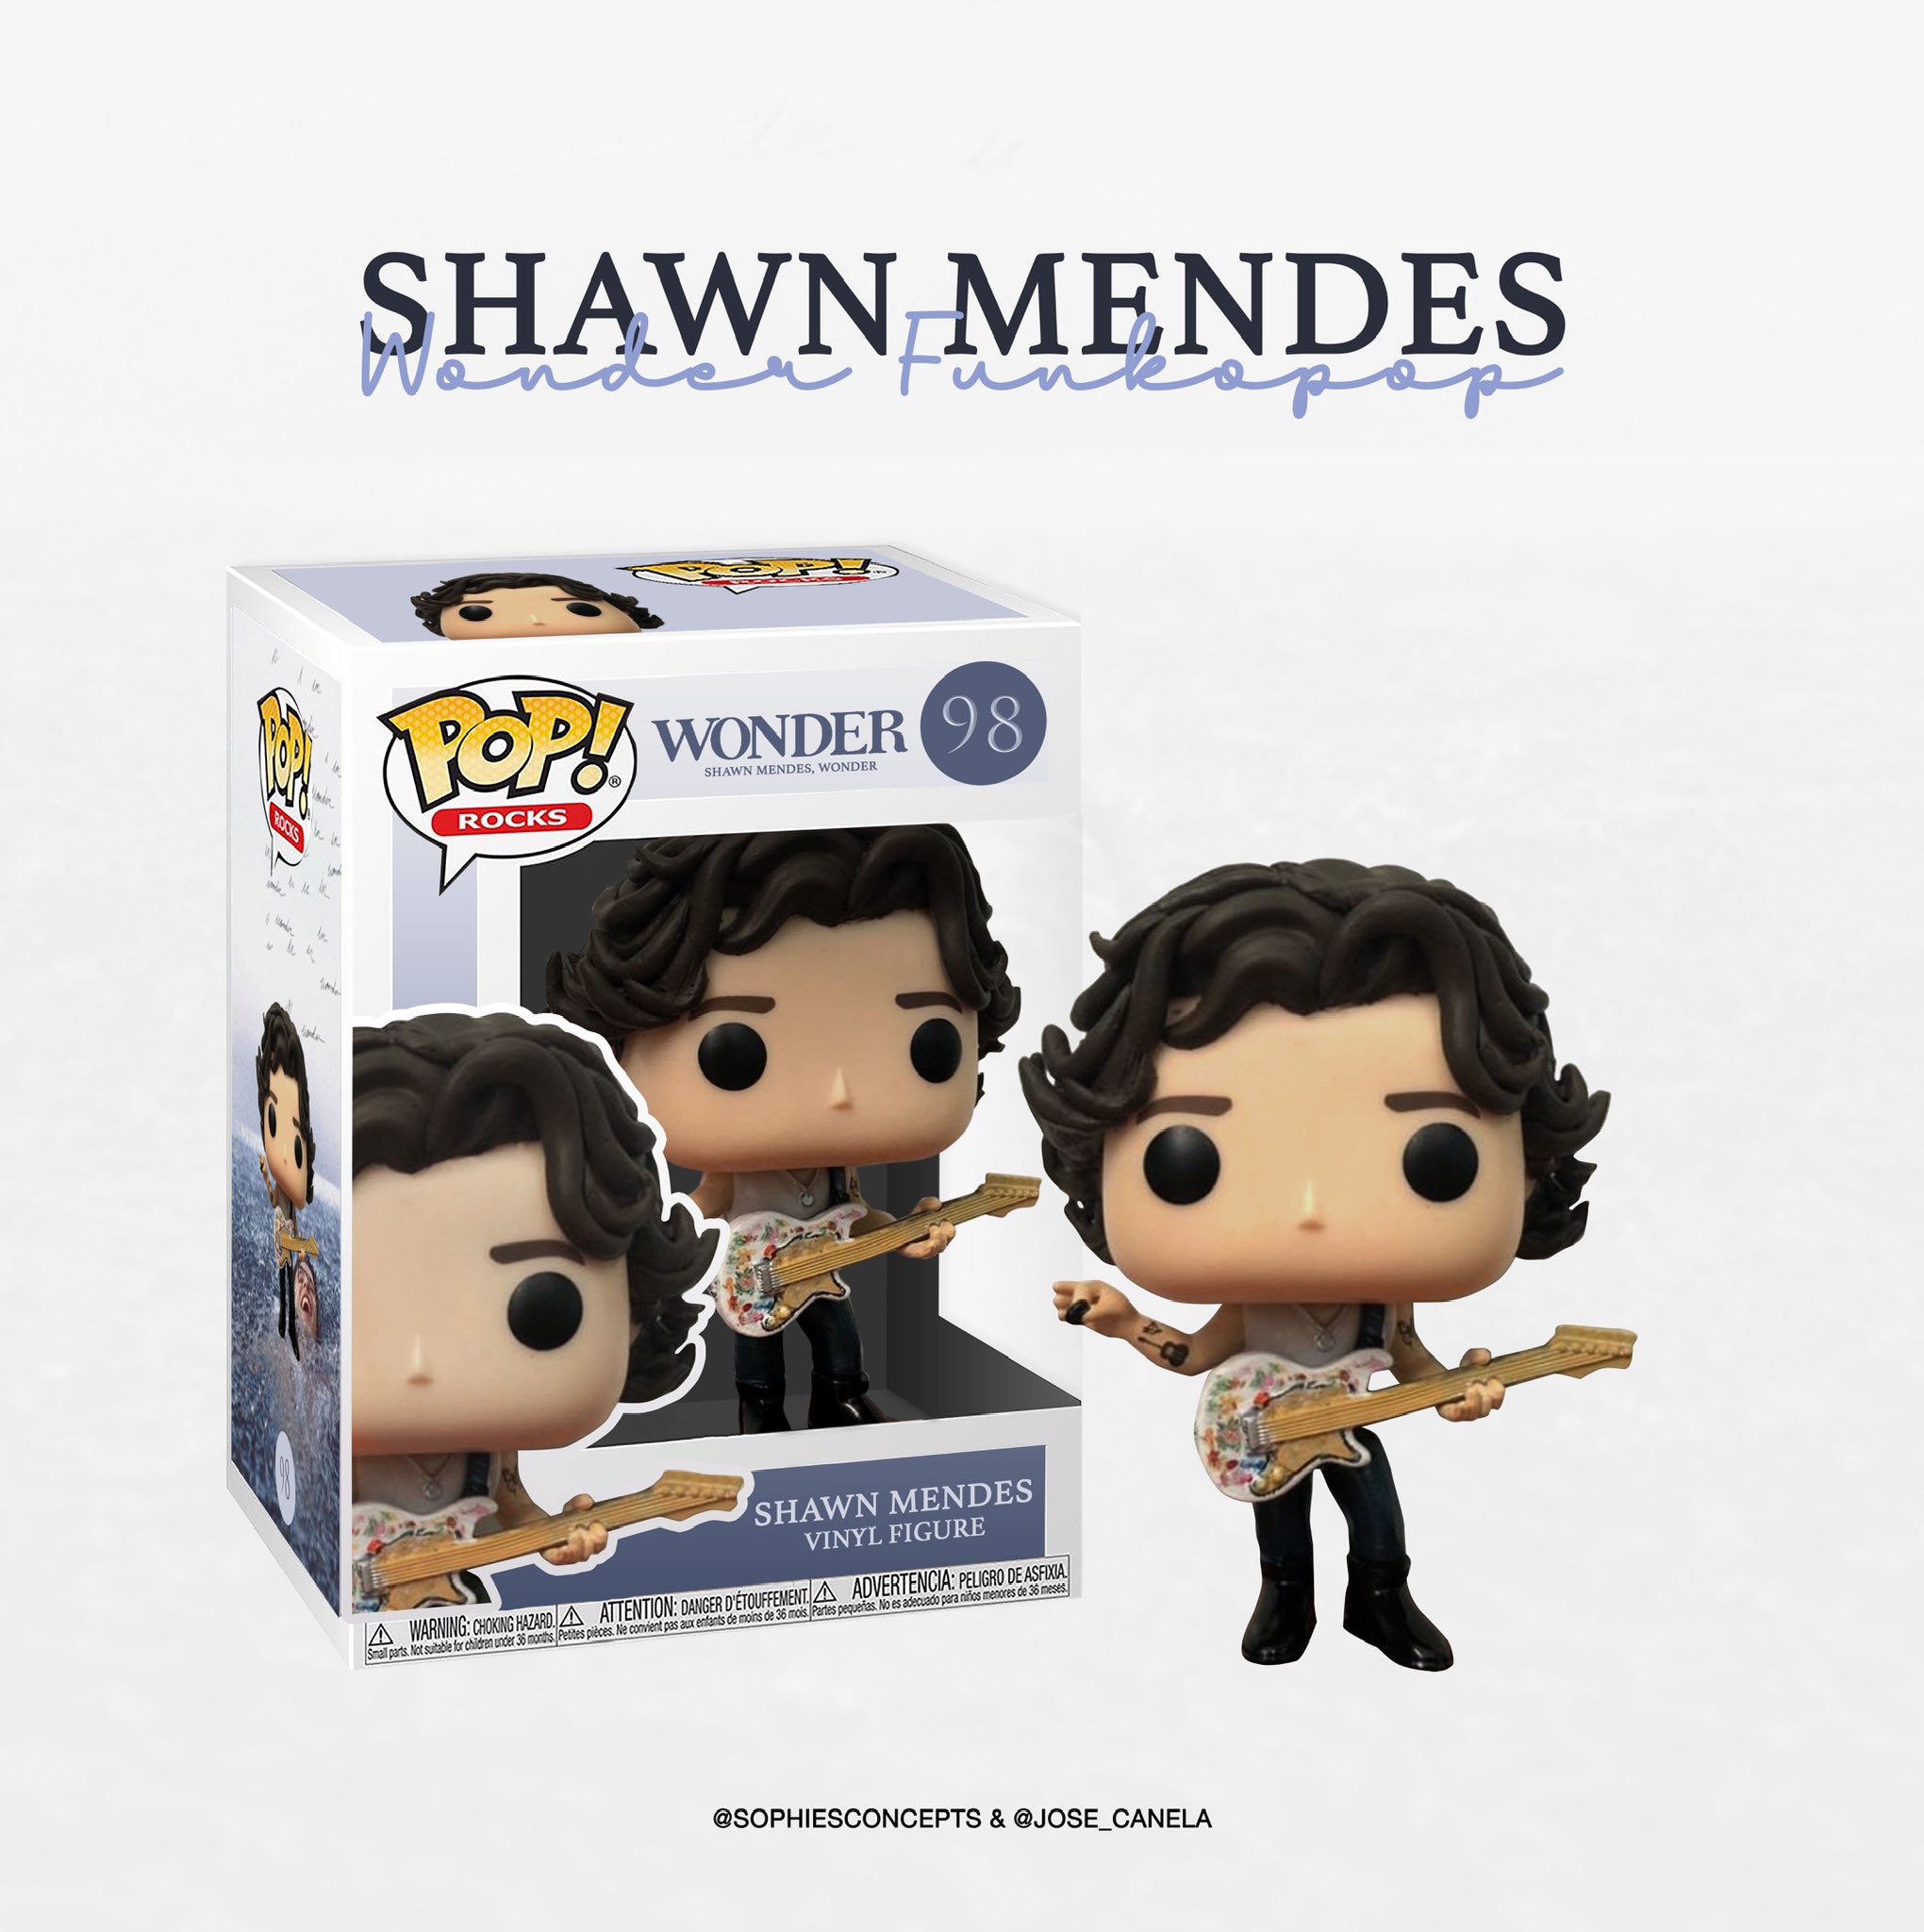 Voorwaarden belegd broodje Productief sophie on Twitter: "Shawn Mendes Wonder Funkopop 💙 • Hii! Another  collaboration with @jose_canela7 he made the funkopop and I created the  box!! What do you think? • #shawnmendes #mendesarmy #wonder  https://t.co/Nu265g4tZ6" /